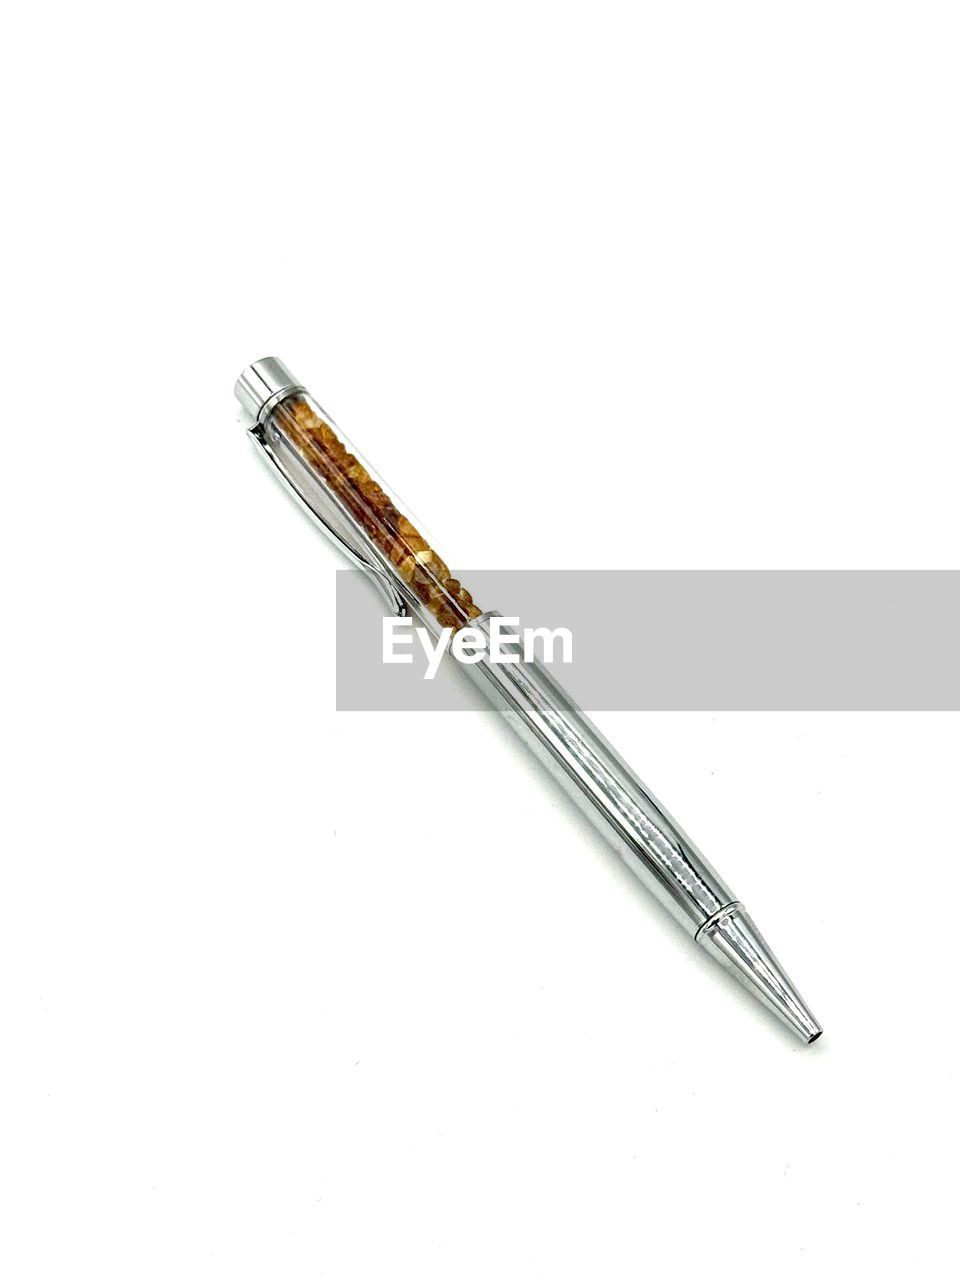 pen, white background, single object, studio shot, indoors, ball pen, fountain pen, writing instrument, cut out, no people, office supplies, close-up